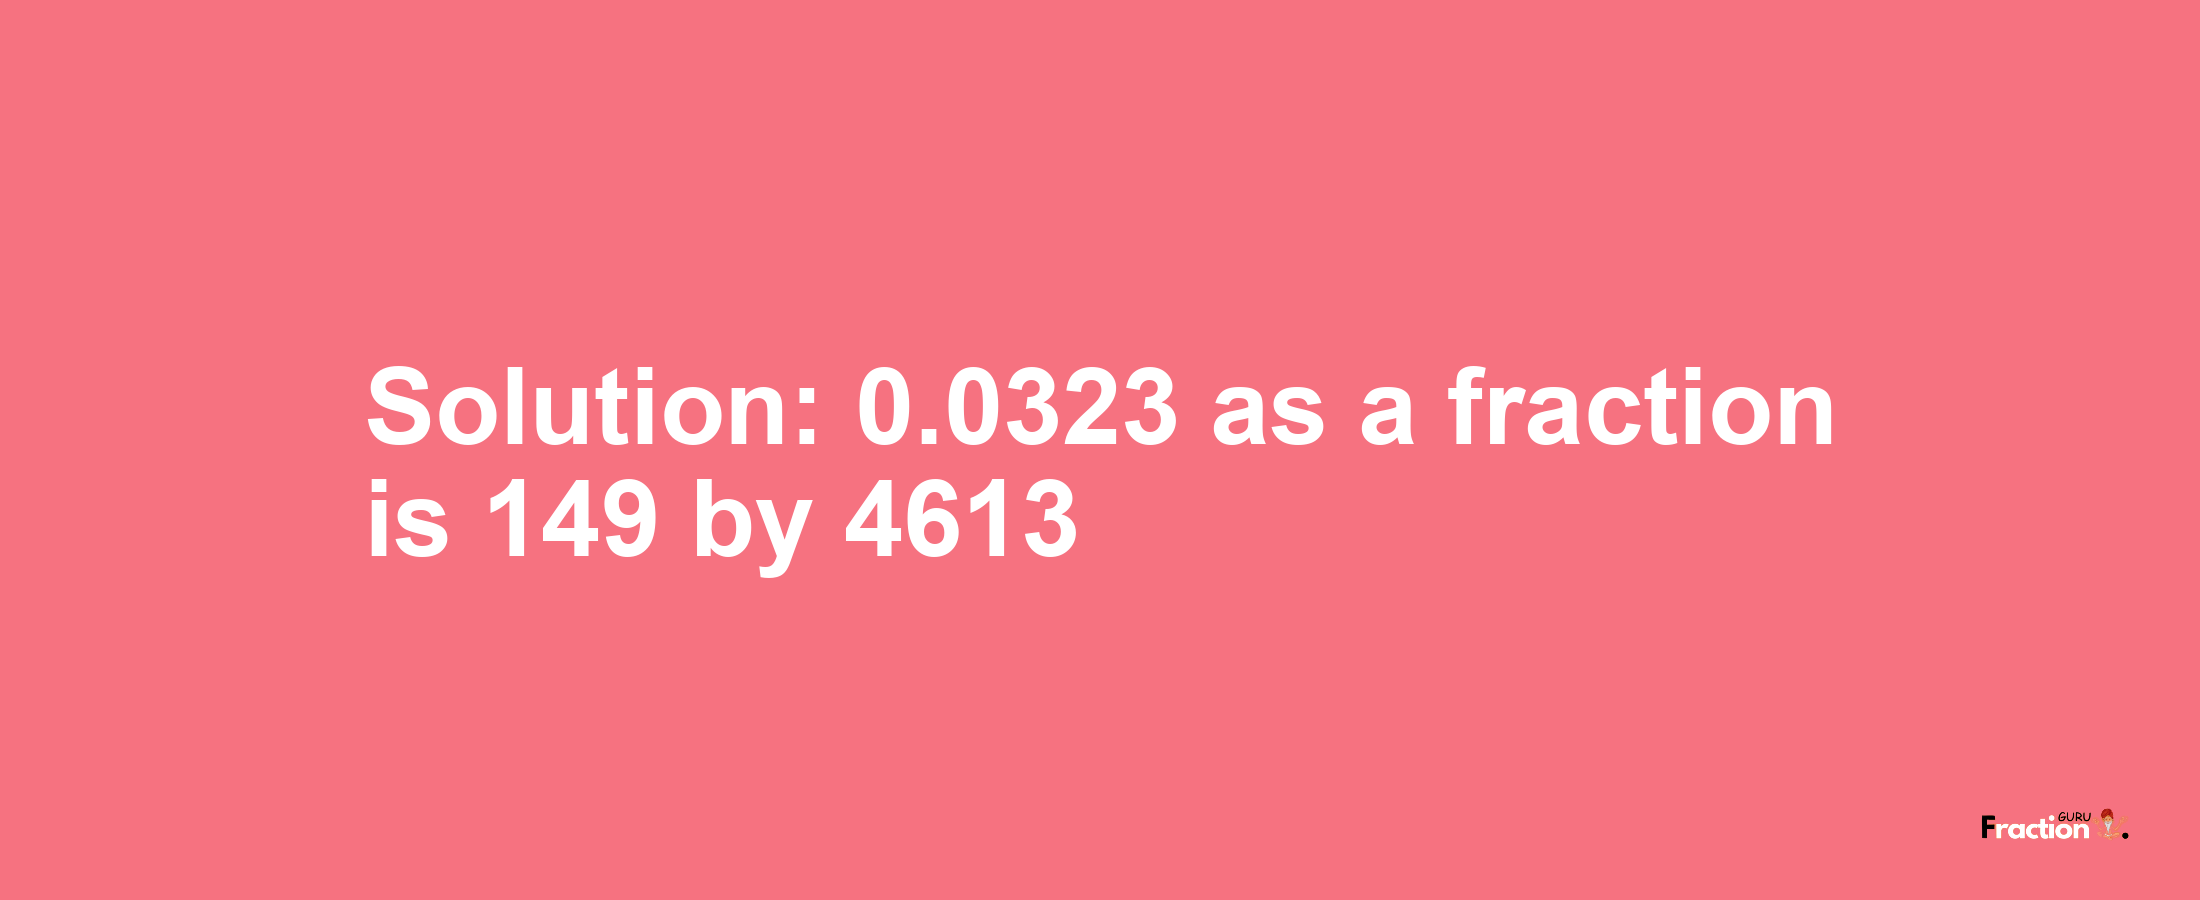 Solution:0.0323 as a fraction is 149/4613